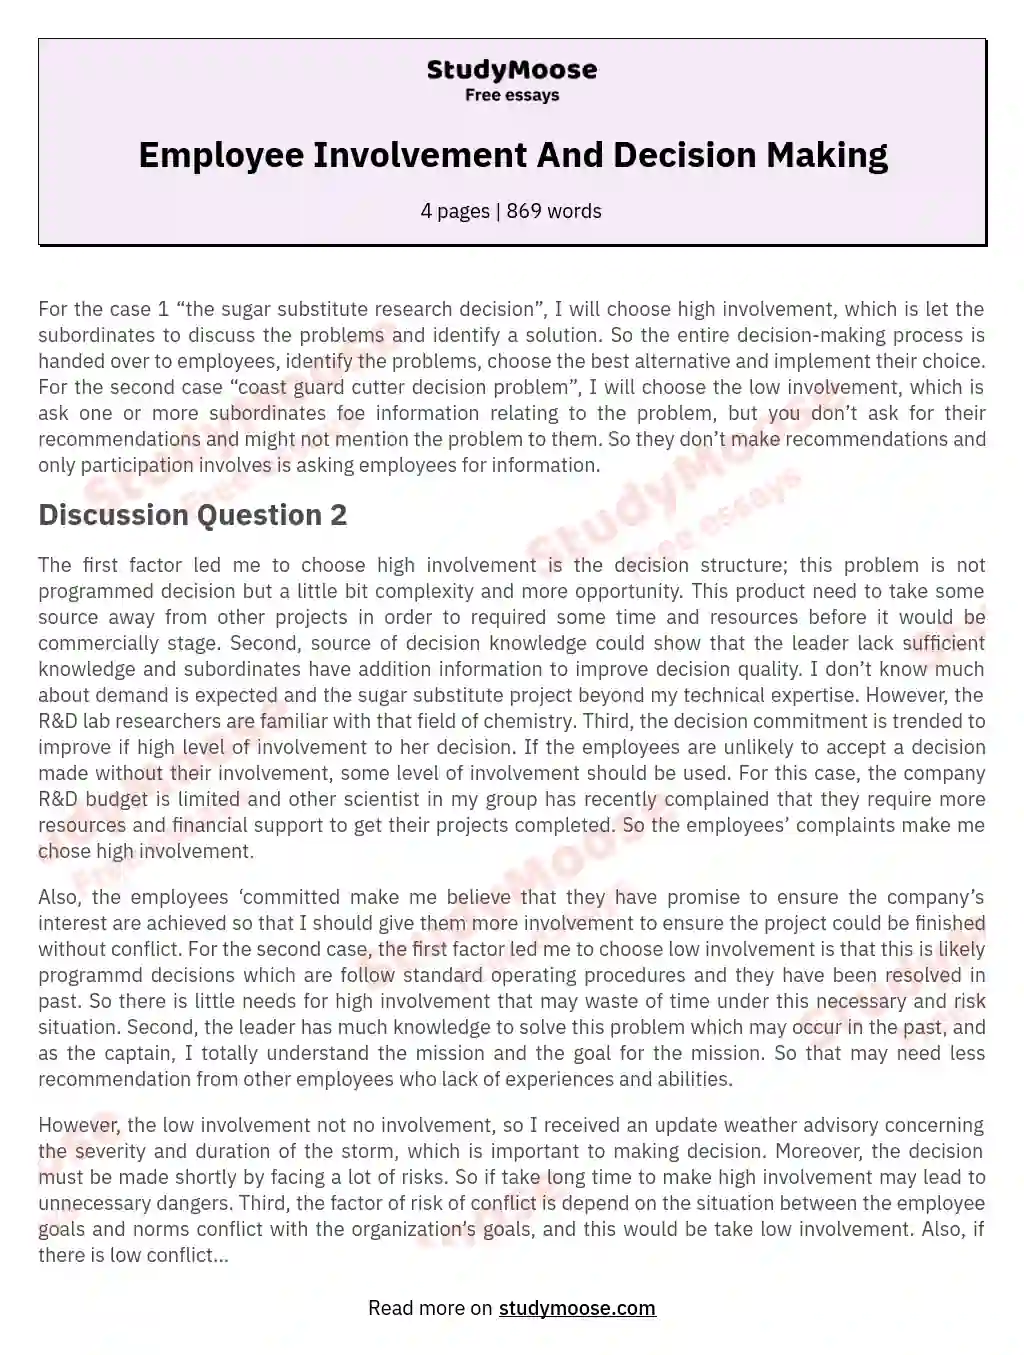 Employee Involvement And Decision Making essay